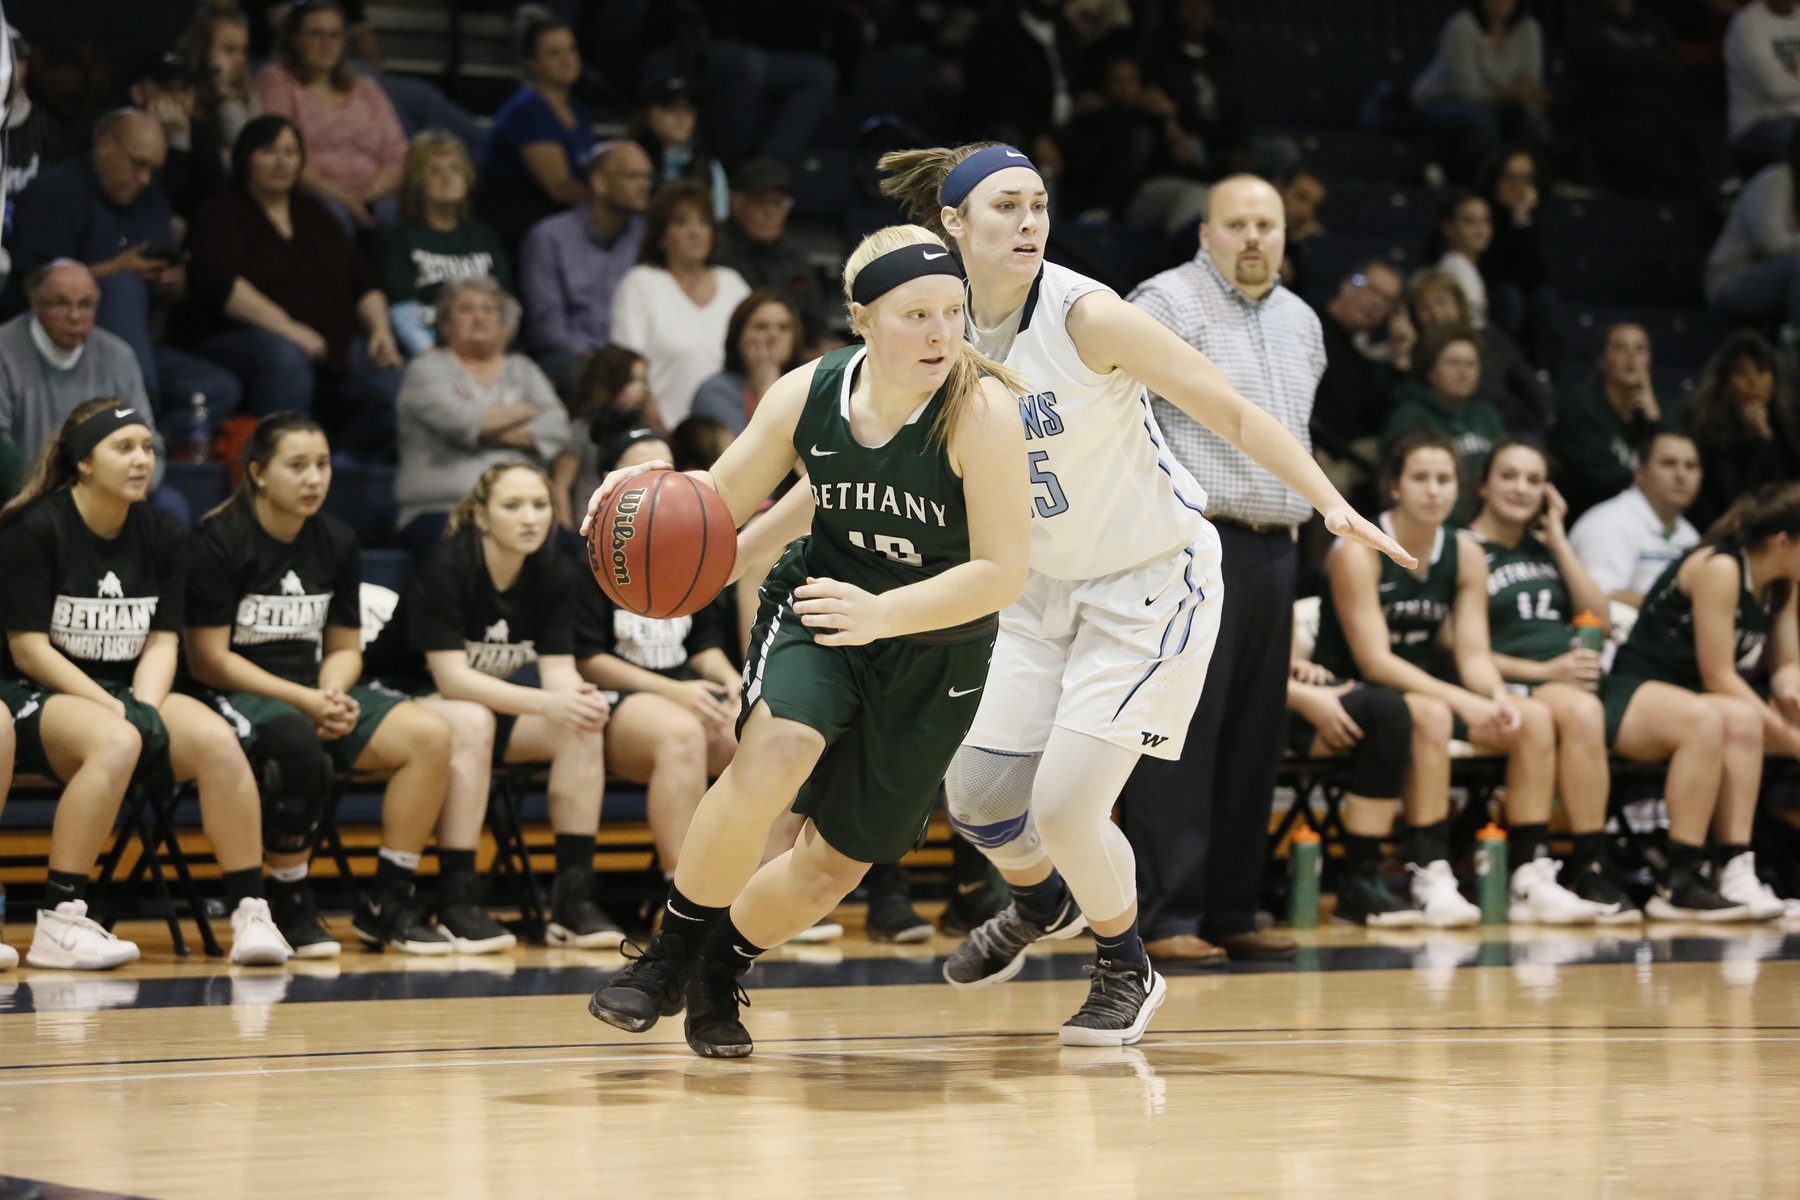 Bison Dealt First Loss of the Season to Albion, 66-57